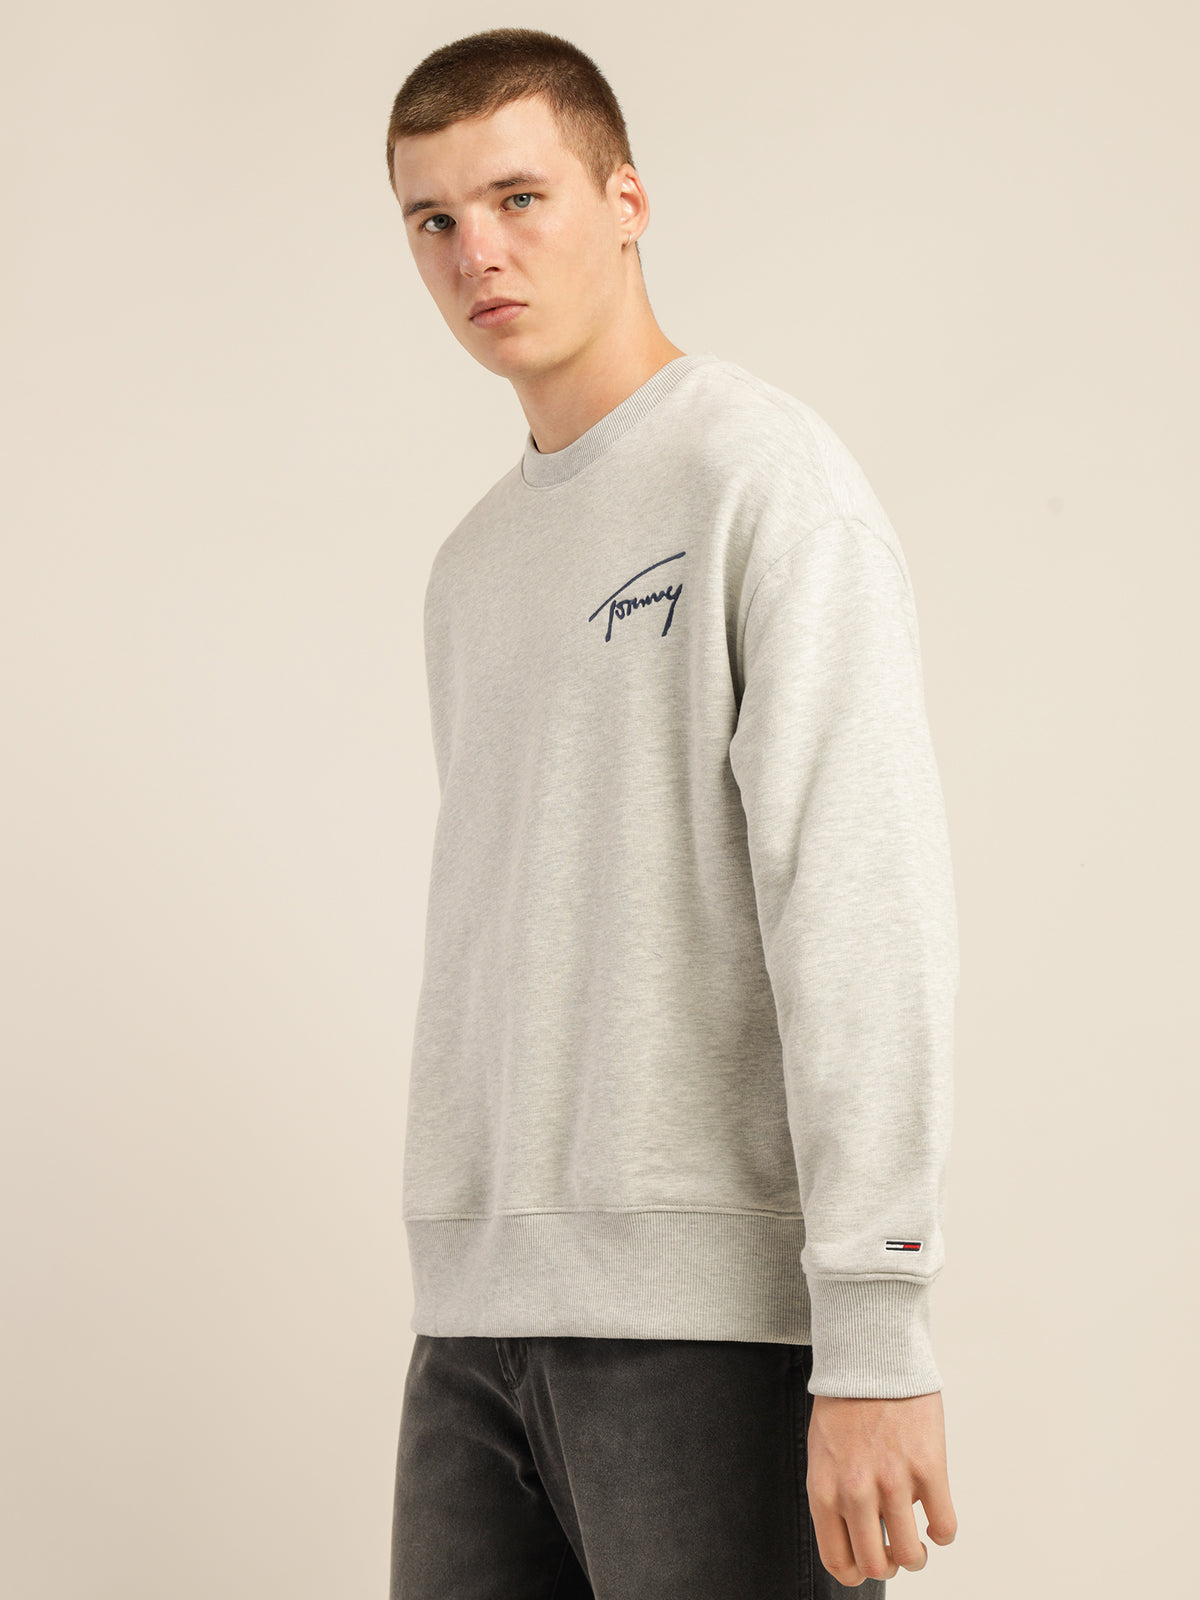 Recycled Signature Logo Relaxed Sweatshirt in Light Grey Heather